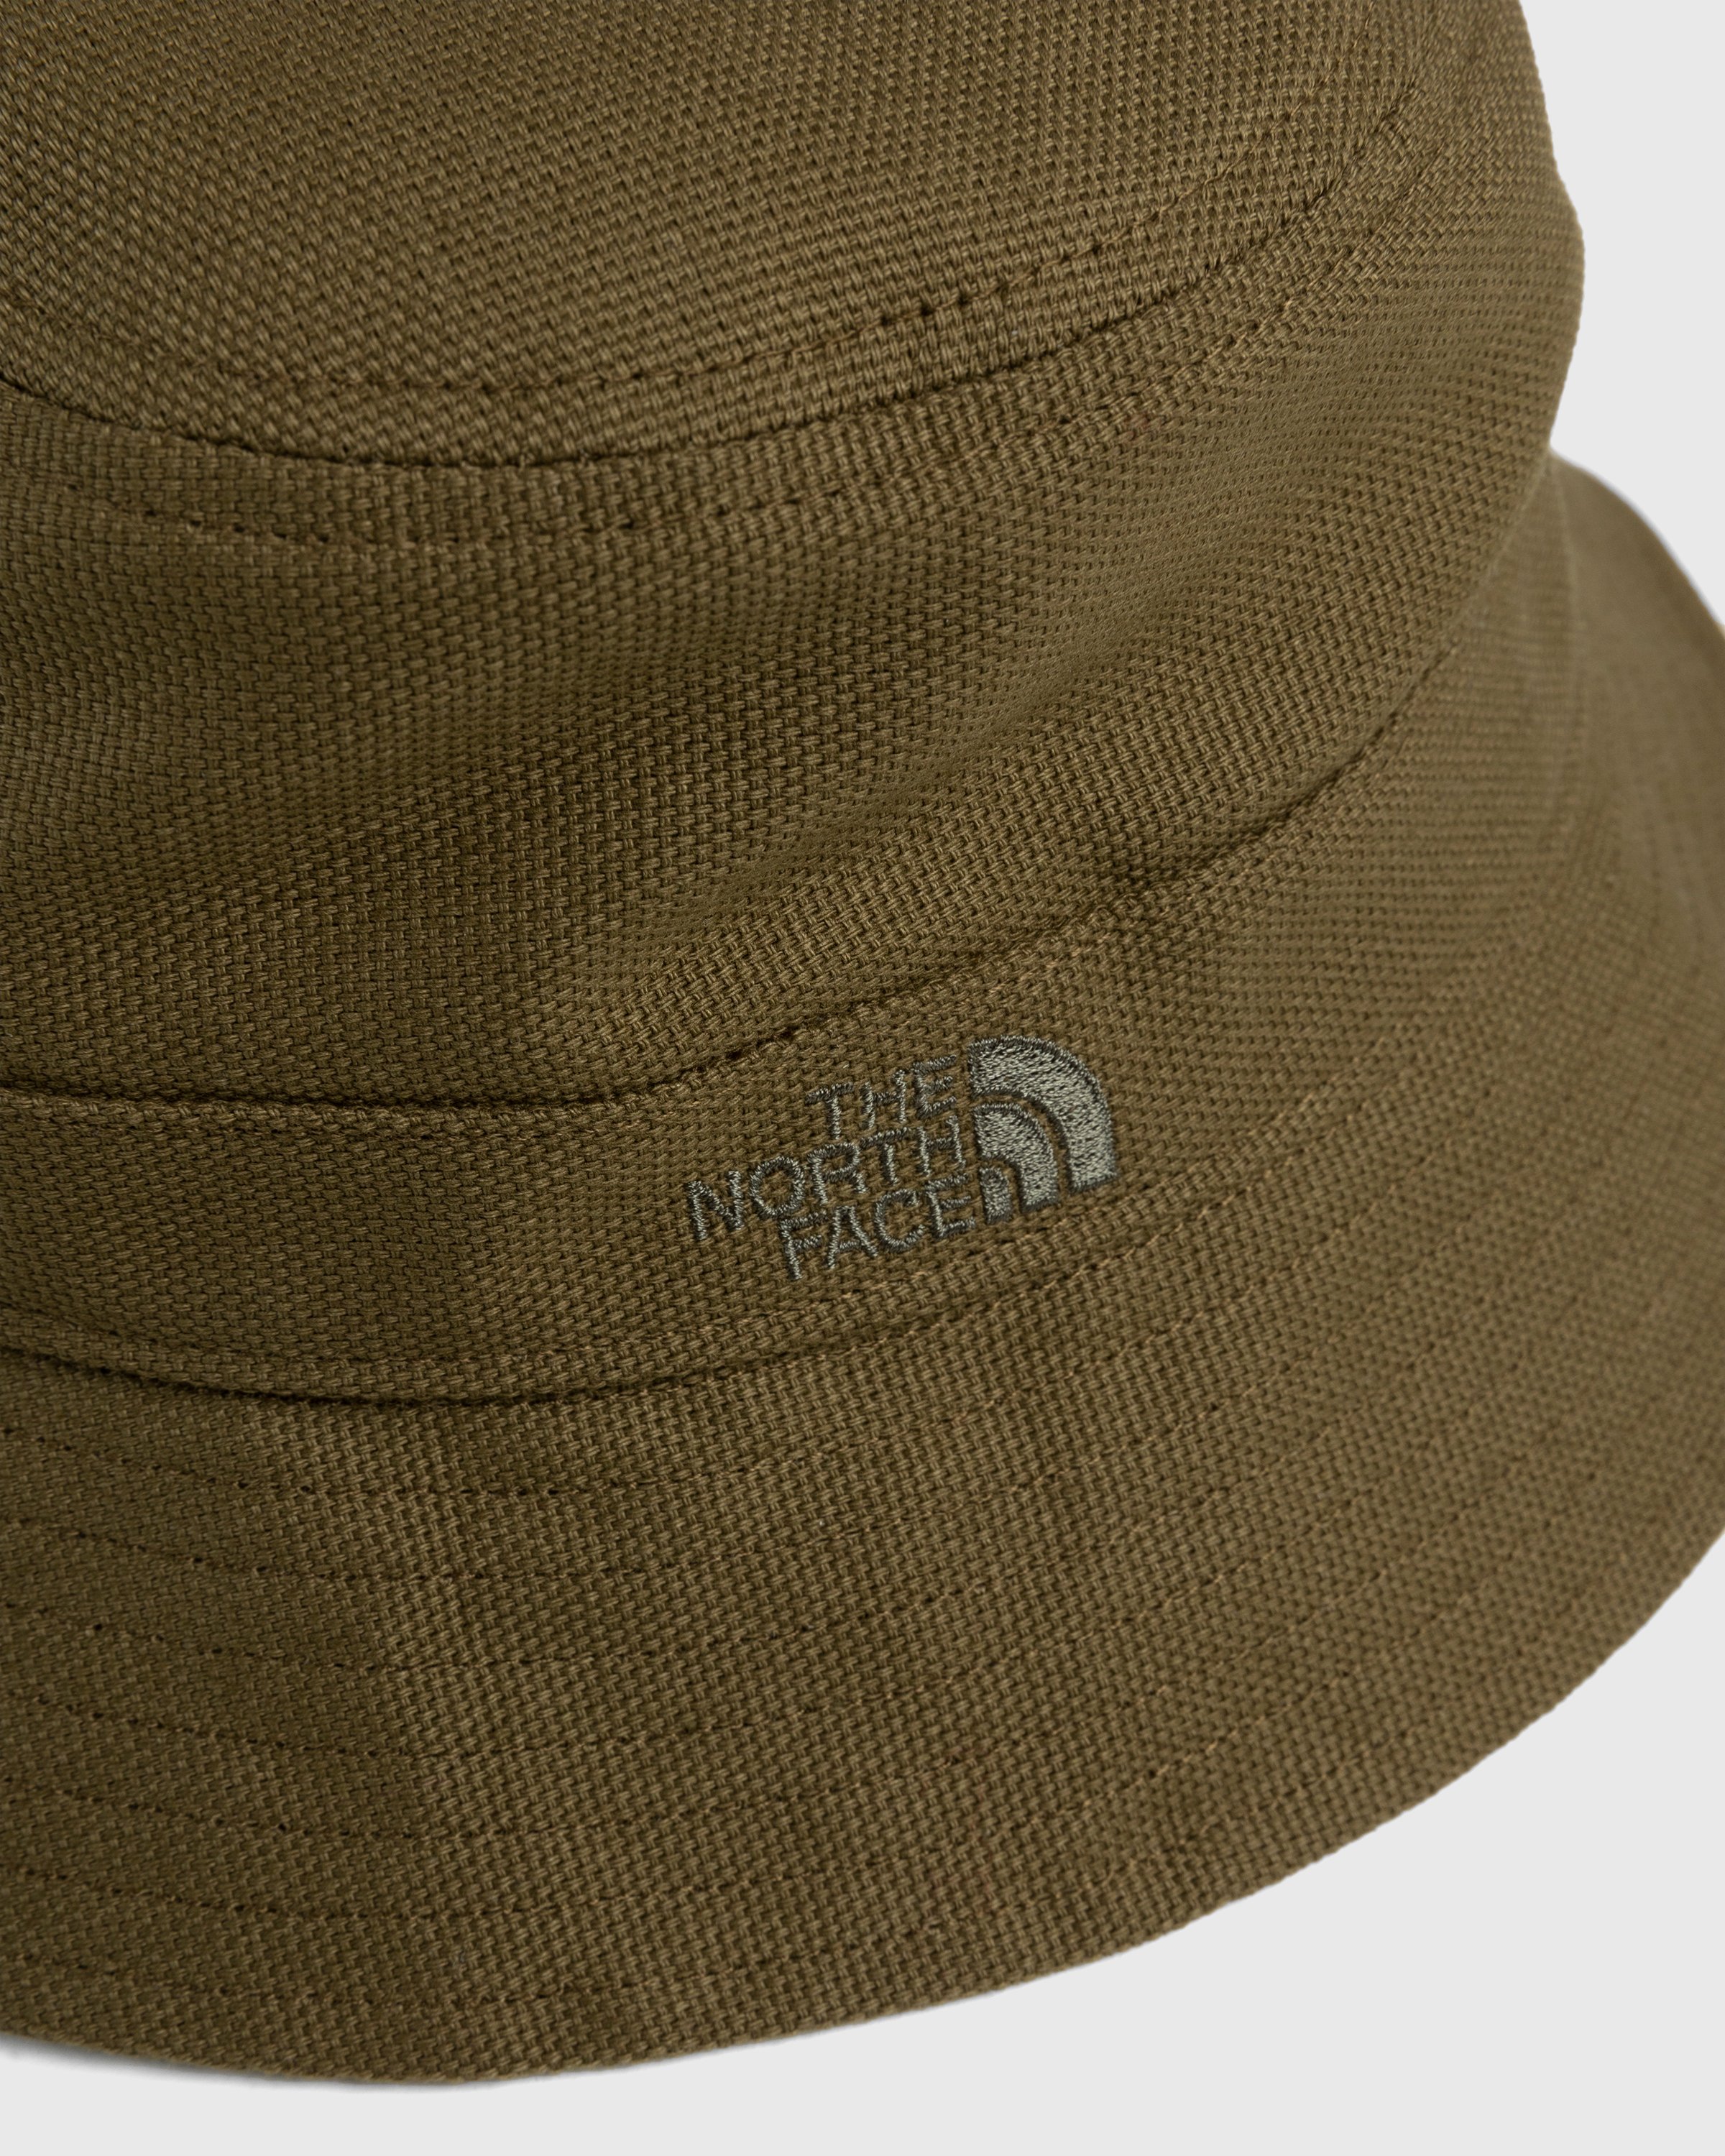 The North Face - Mountain Bucket Hat Olive - Accessories - Green - Image 4